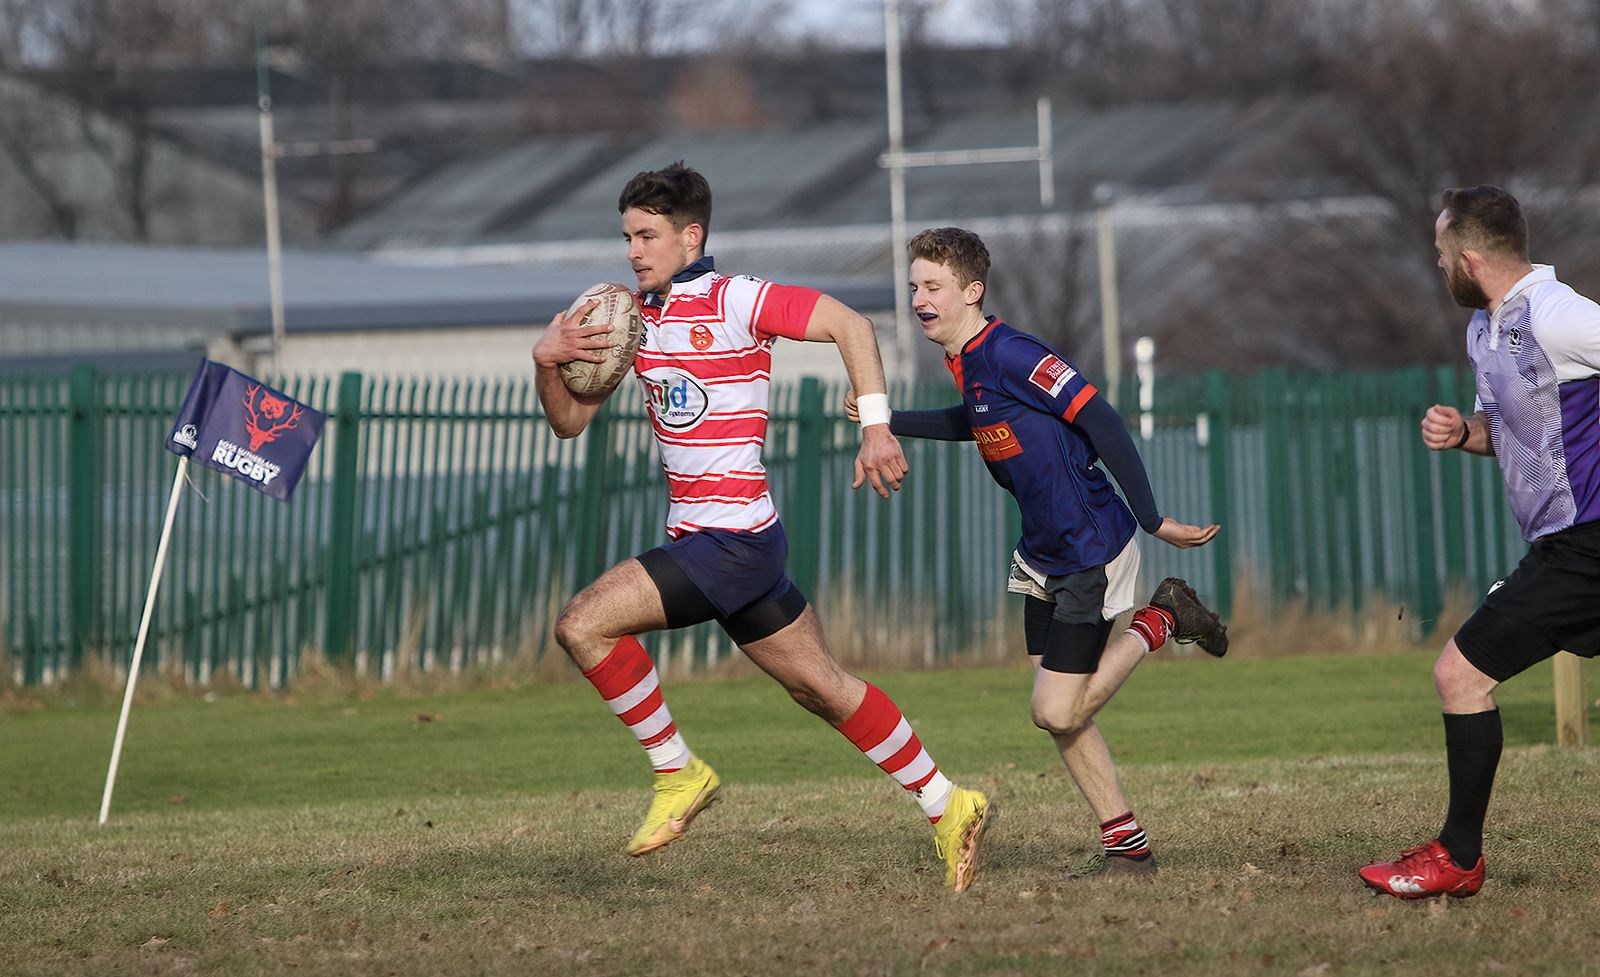 Rory Millar on his way to scoring a try